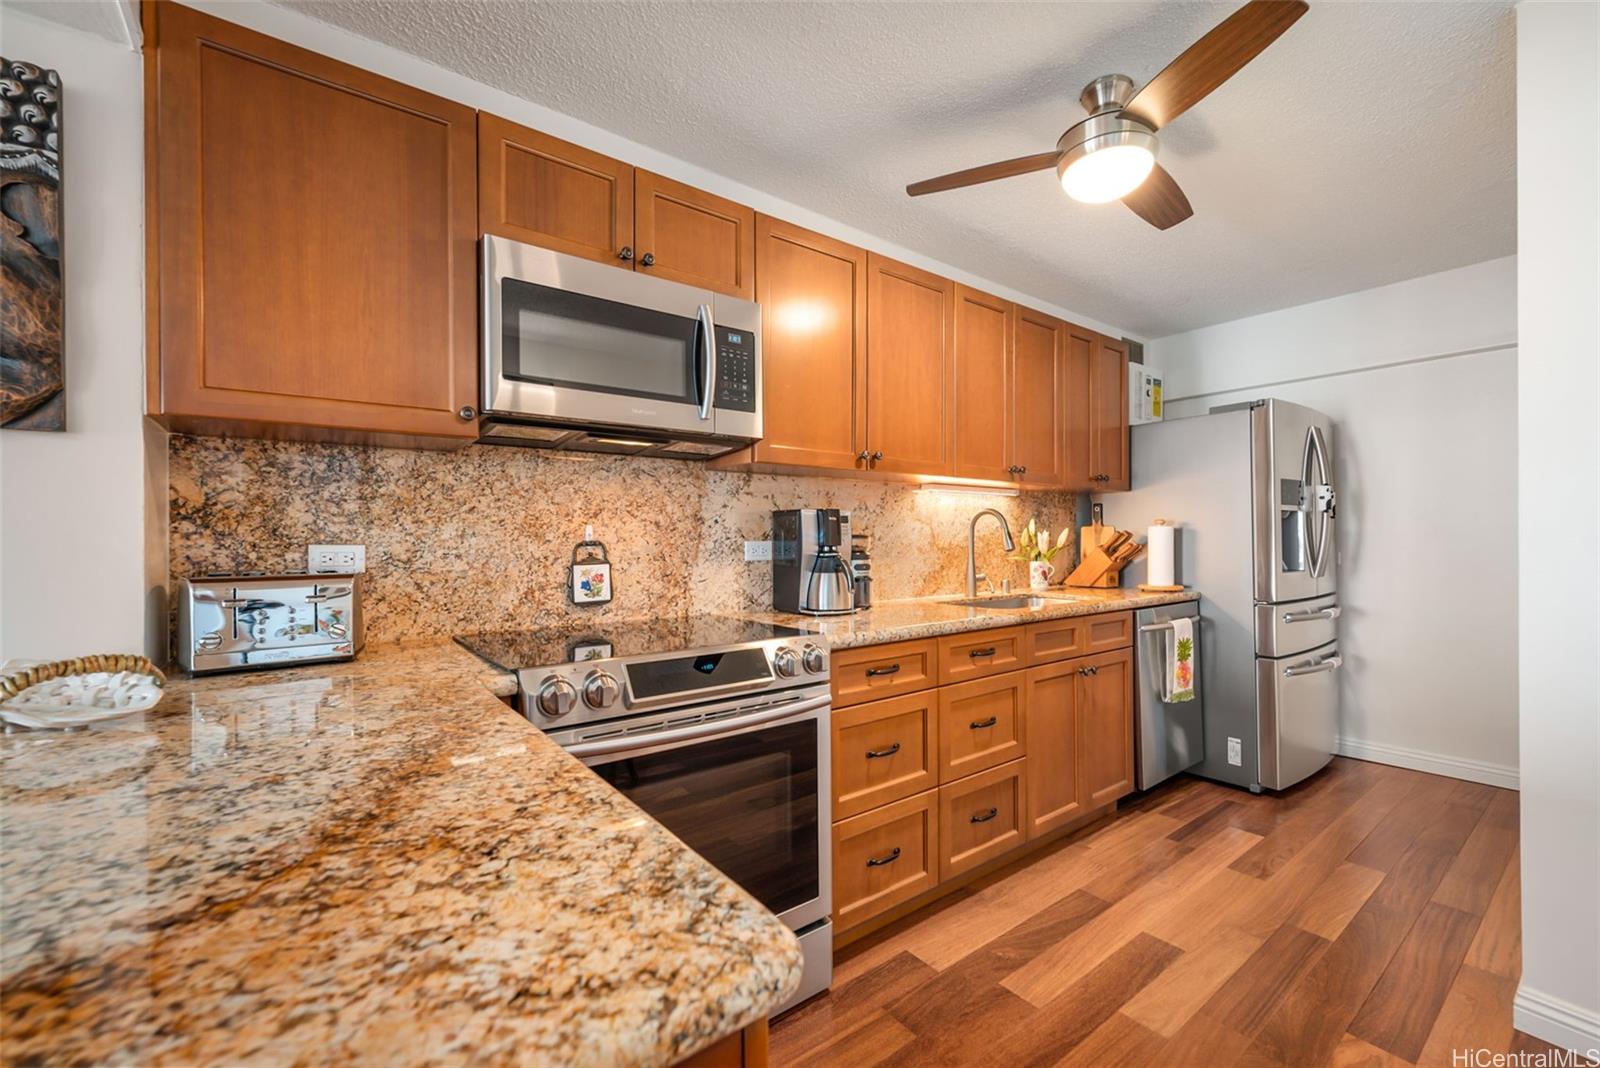 a kitchen with stainless steel appliances granite countertop a stove top oven a sink dishwasher a refrigerator and cabinets with wooden floor